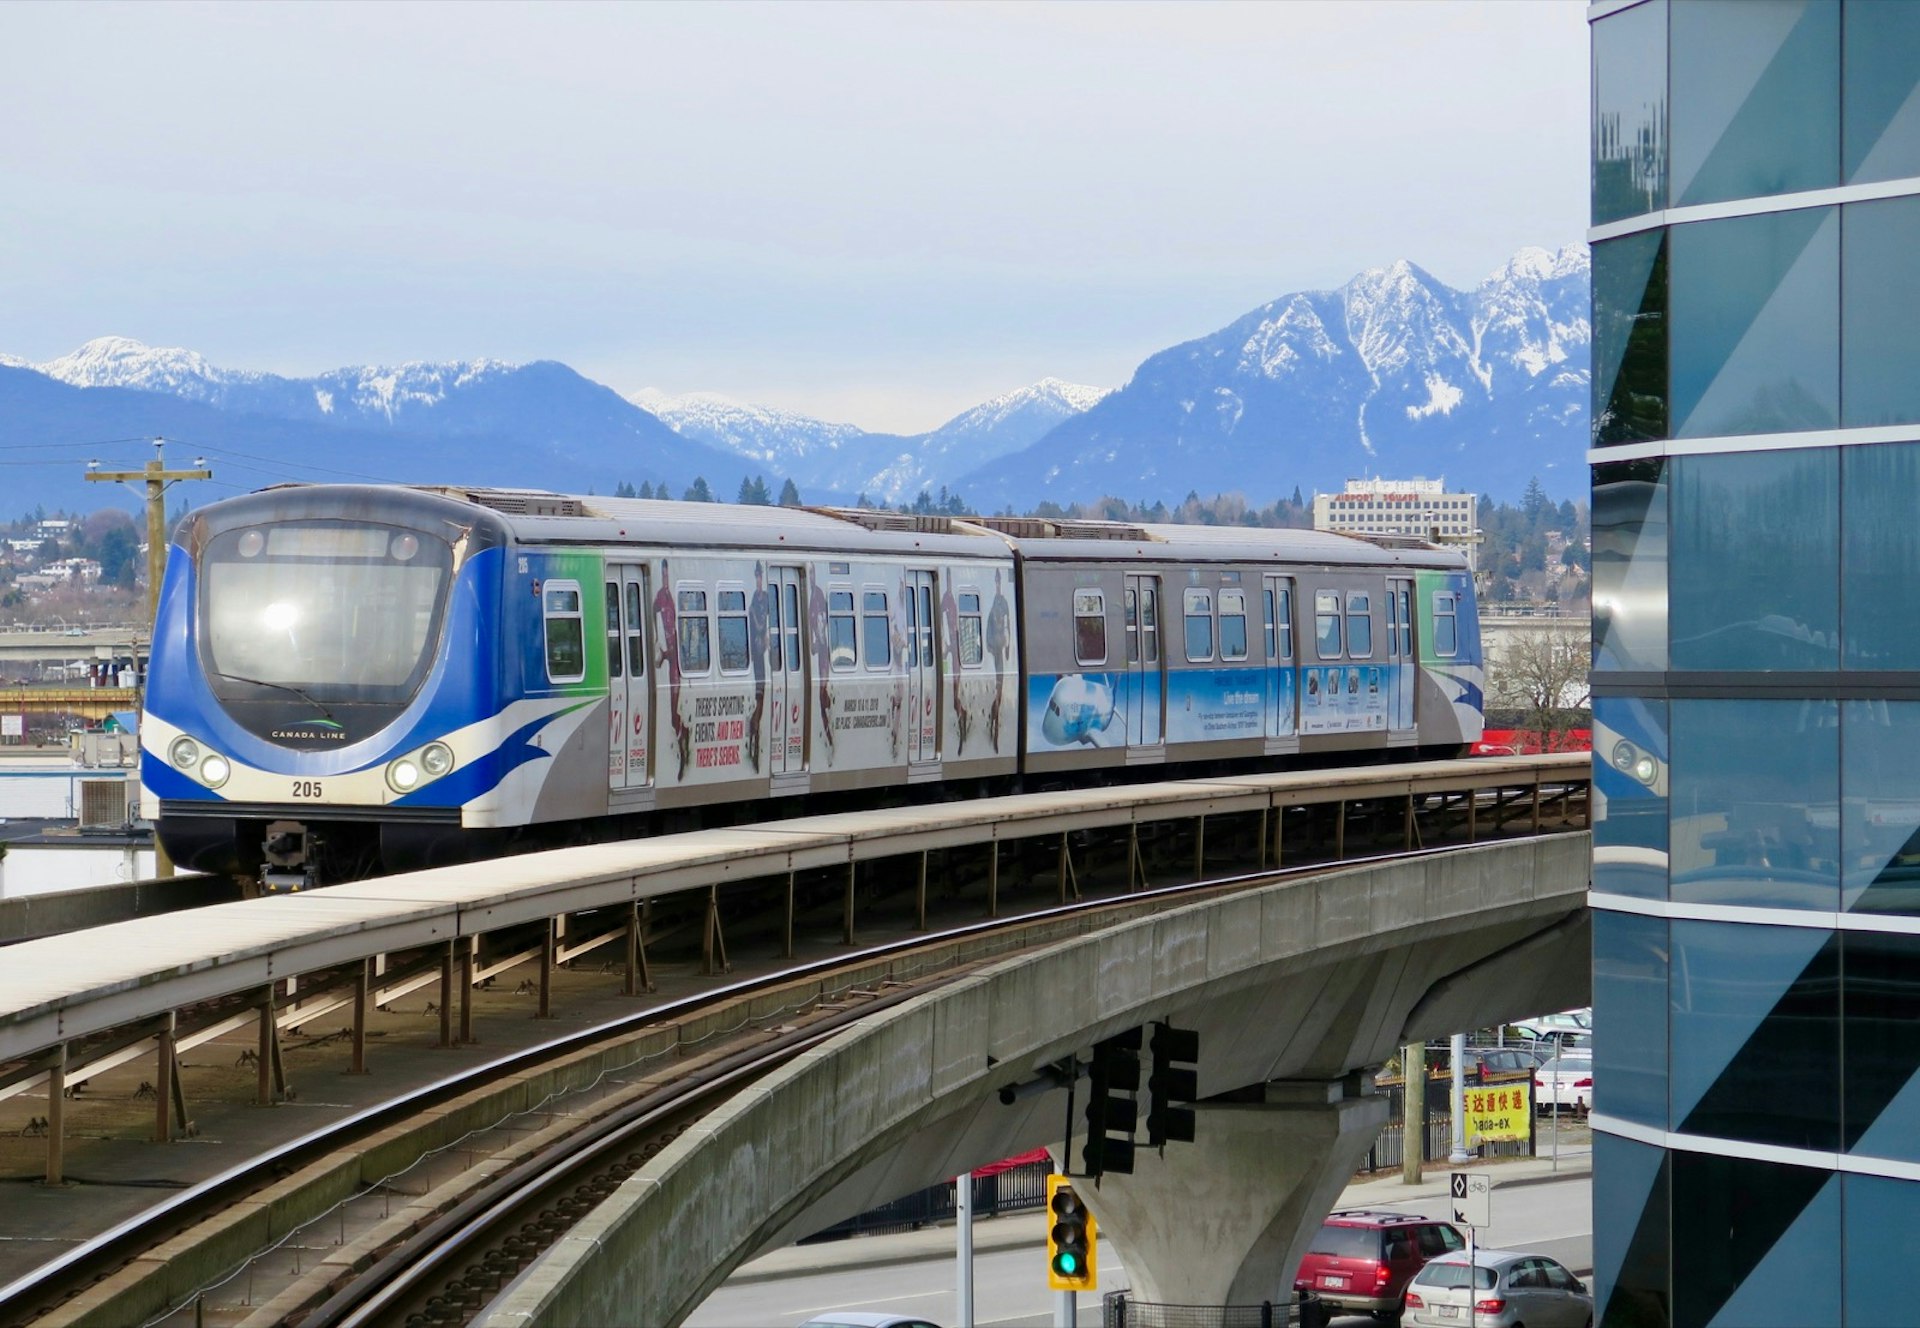 A blue and white and silver SkyTrain train on an elevated track curves around a building with a range of snow-covered mountains in the background